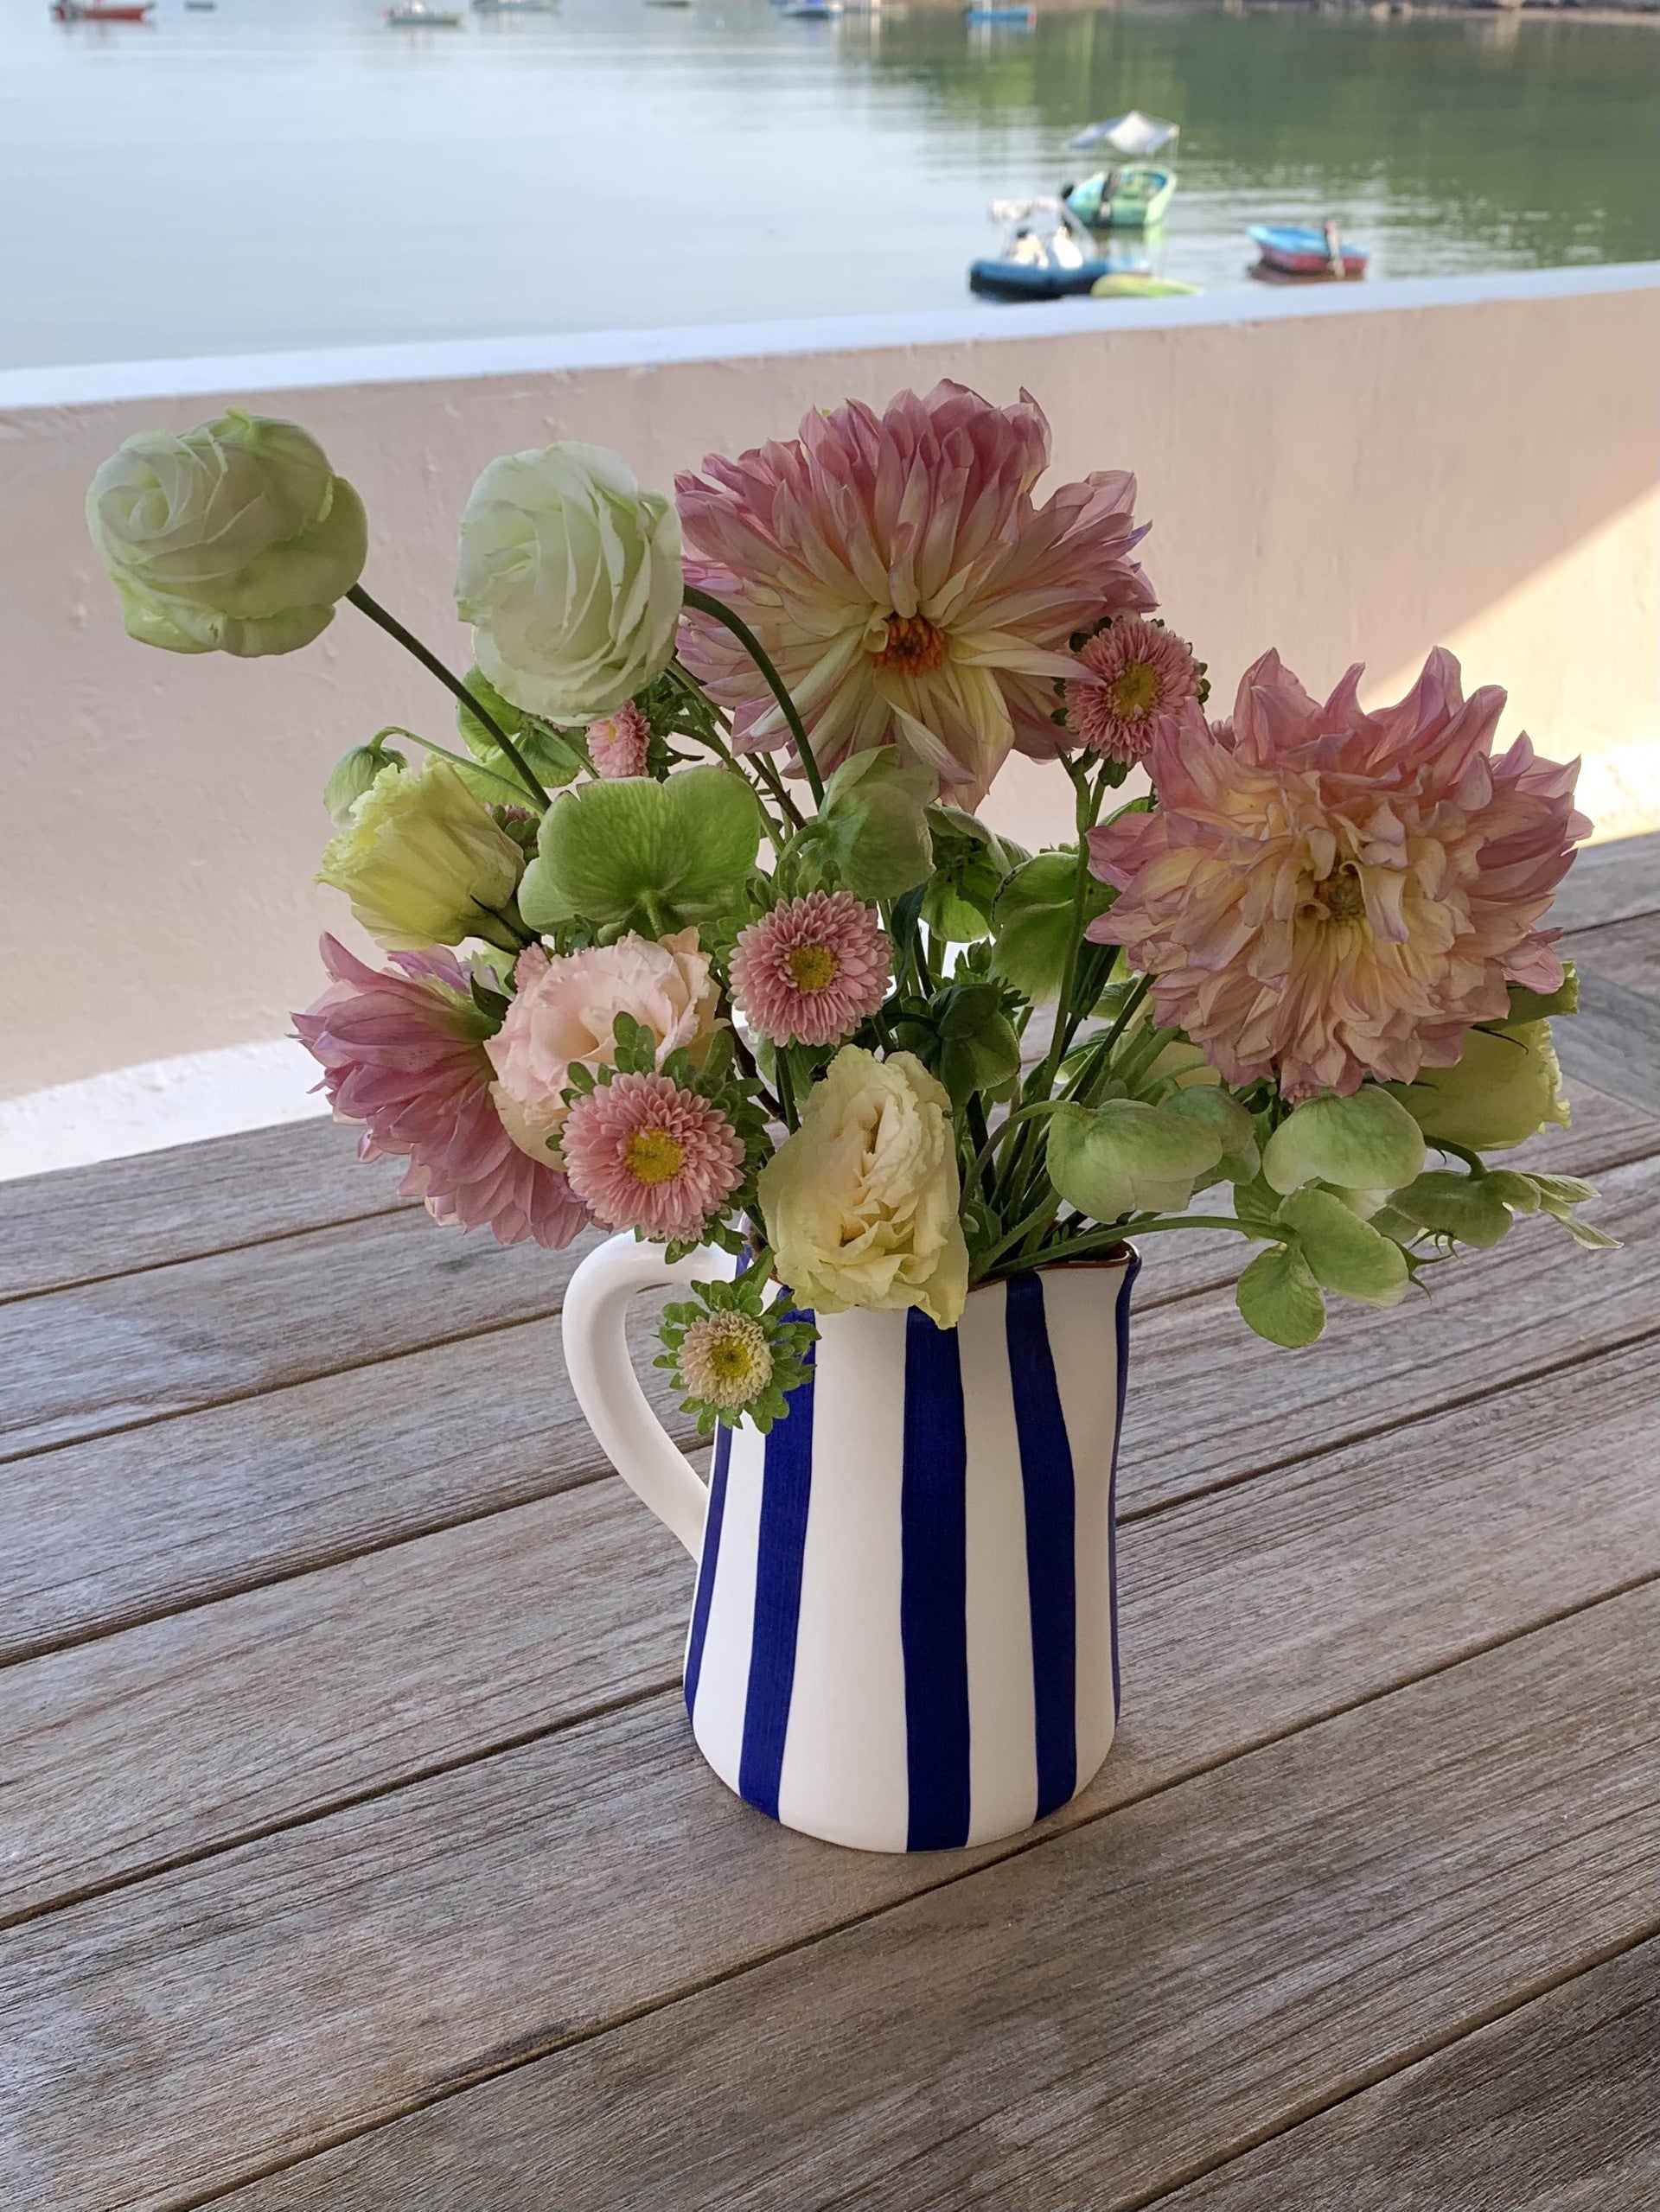 A blue and white hand-painted jug filled with fresh flowers.  The jug is on a wooden table next to the sea.